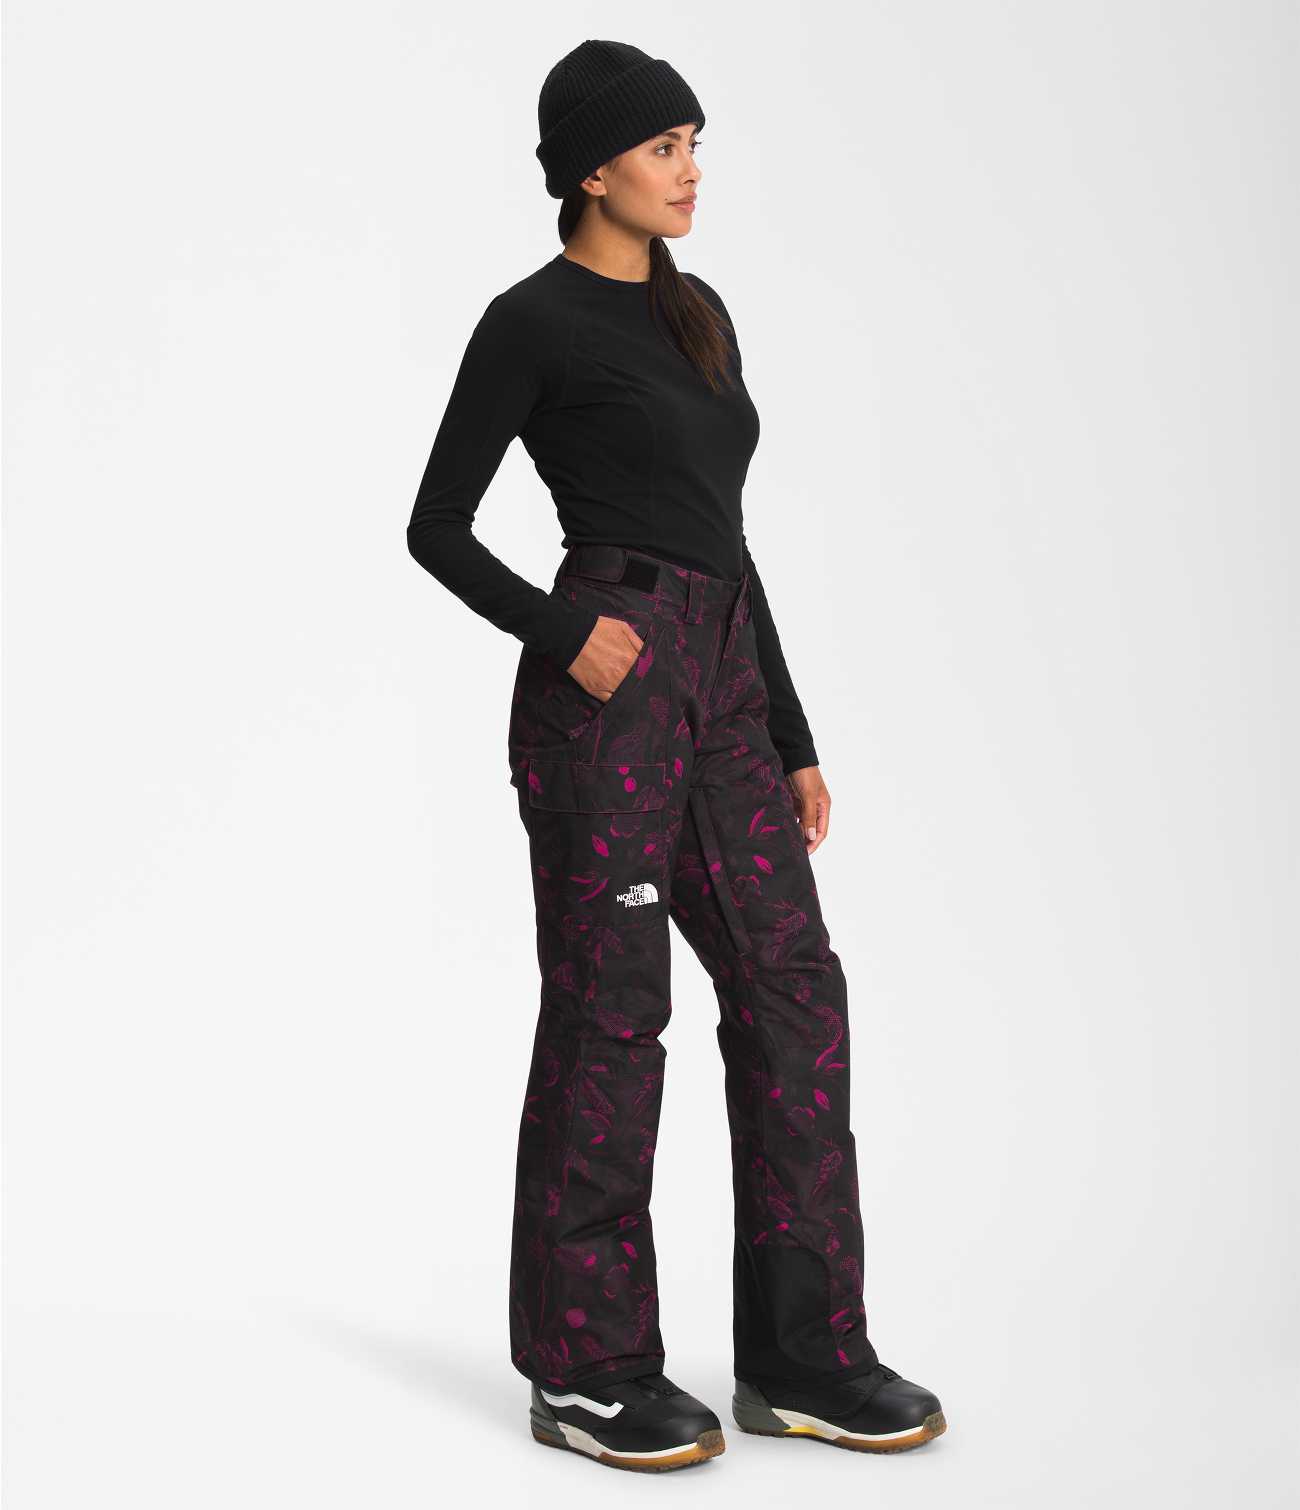 Prairie Summit Shop - The North Face Women's Freedom Insulated Pant